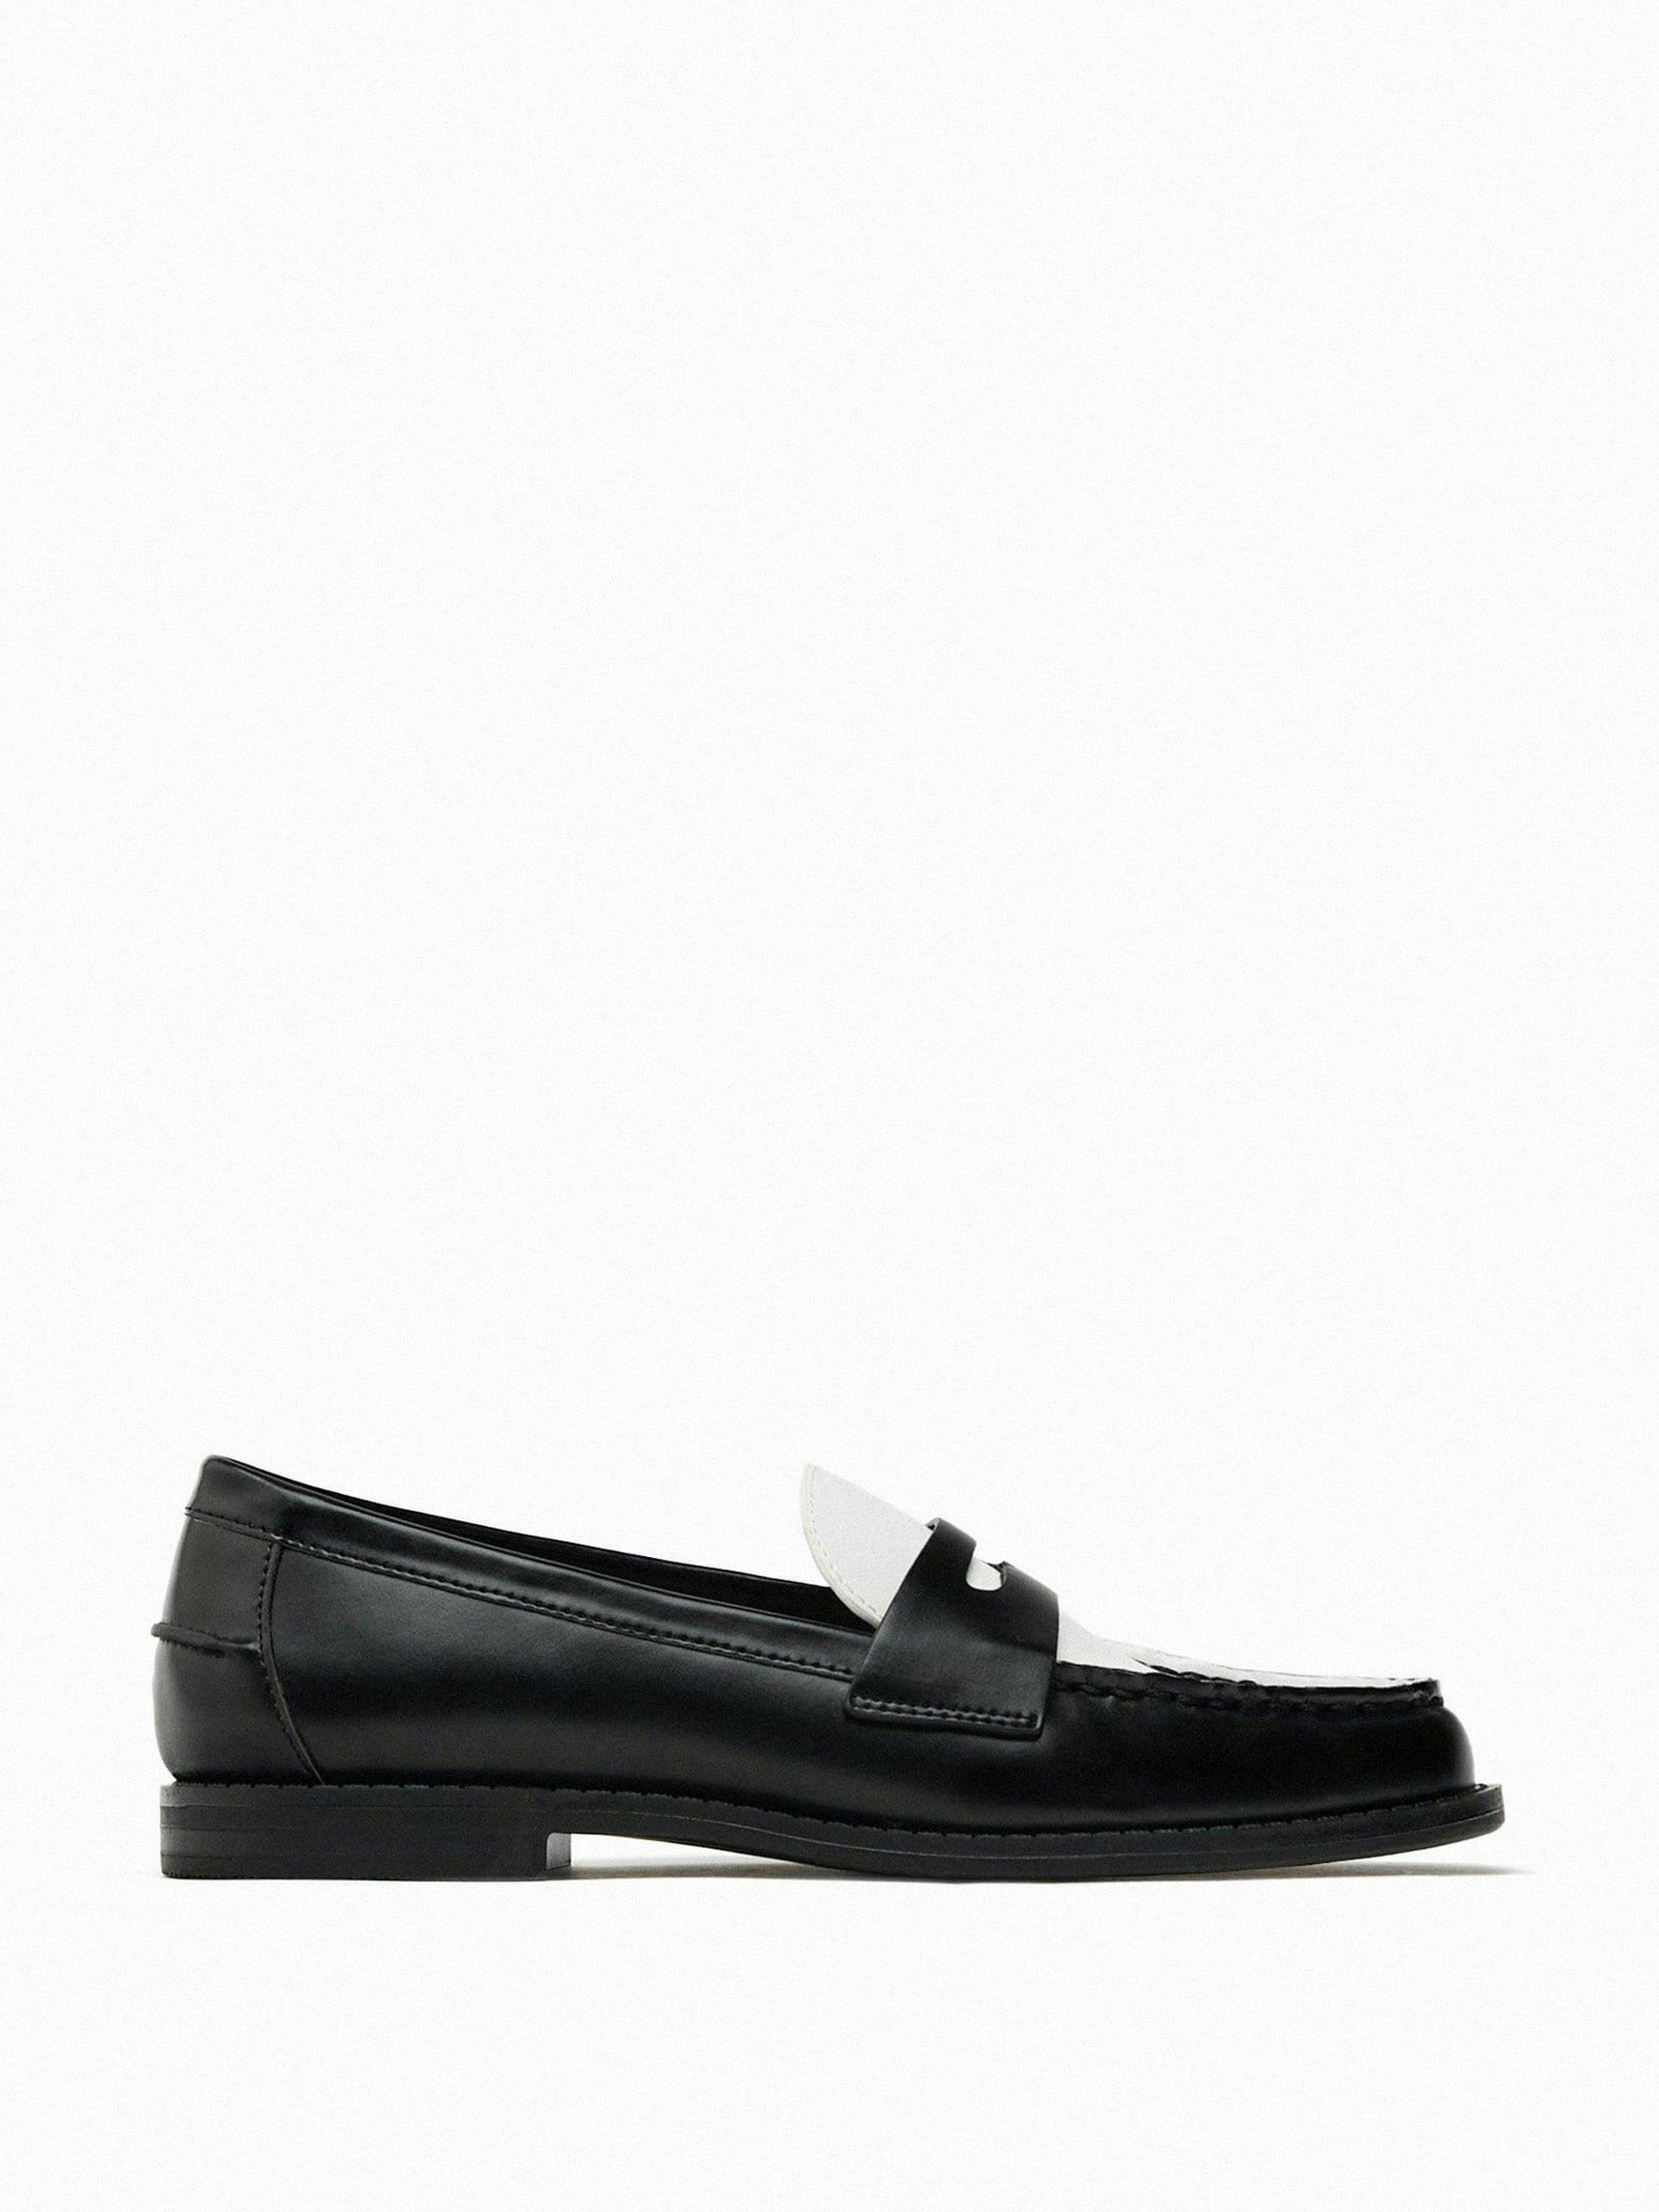 Contrast flat loafers